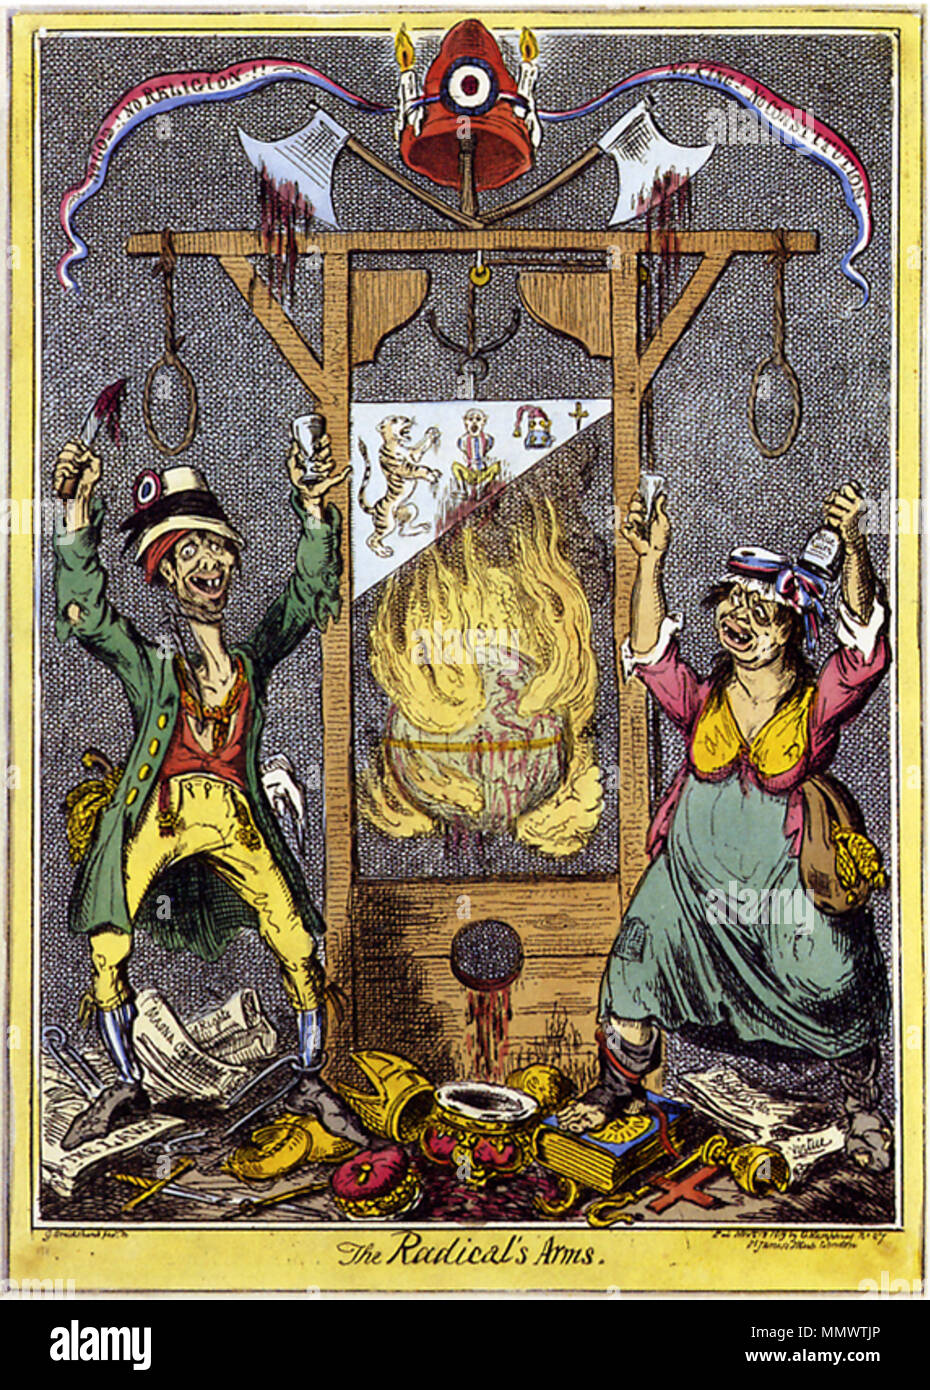 .  English: Caricature by George Cruikshank. The tricolor ribbon is inscribed 'No God! No Religion! No King! No Constitution!' Below the ribbon, and its Phrygian cap with tricolor cockade, are two bloody axes, attached to a guillotine, whose blade is suspended above a burning globe. An emaciated man and drunken woman dressed in ragged clothes serve as heraldic 'supporters', gleefully dancing on discarded royal and clerical regalia... Português: Caricatura por George Cruikshank. A faixa tricolor possui a inscrição 'Sem Deus! Sem Religião! Sem Rei! Sem Constituição!' Abaixo da fita, e seu barret Stock Photo